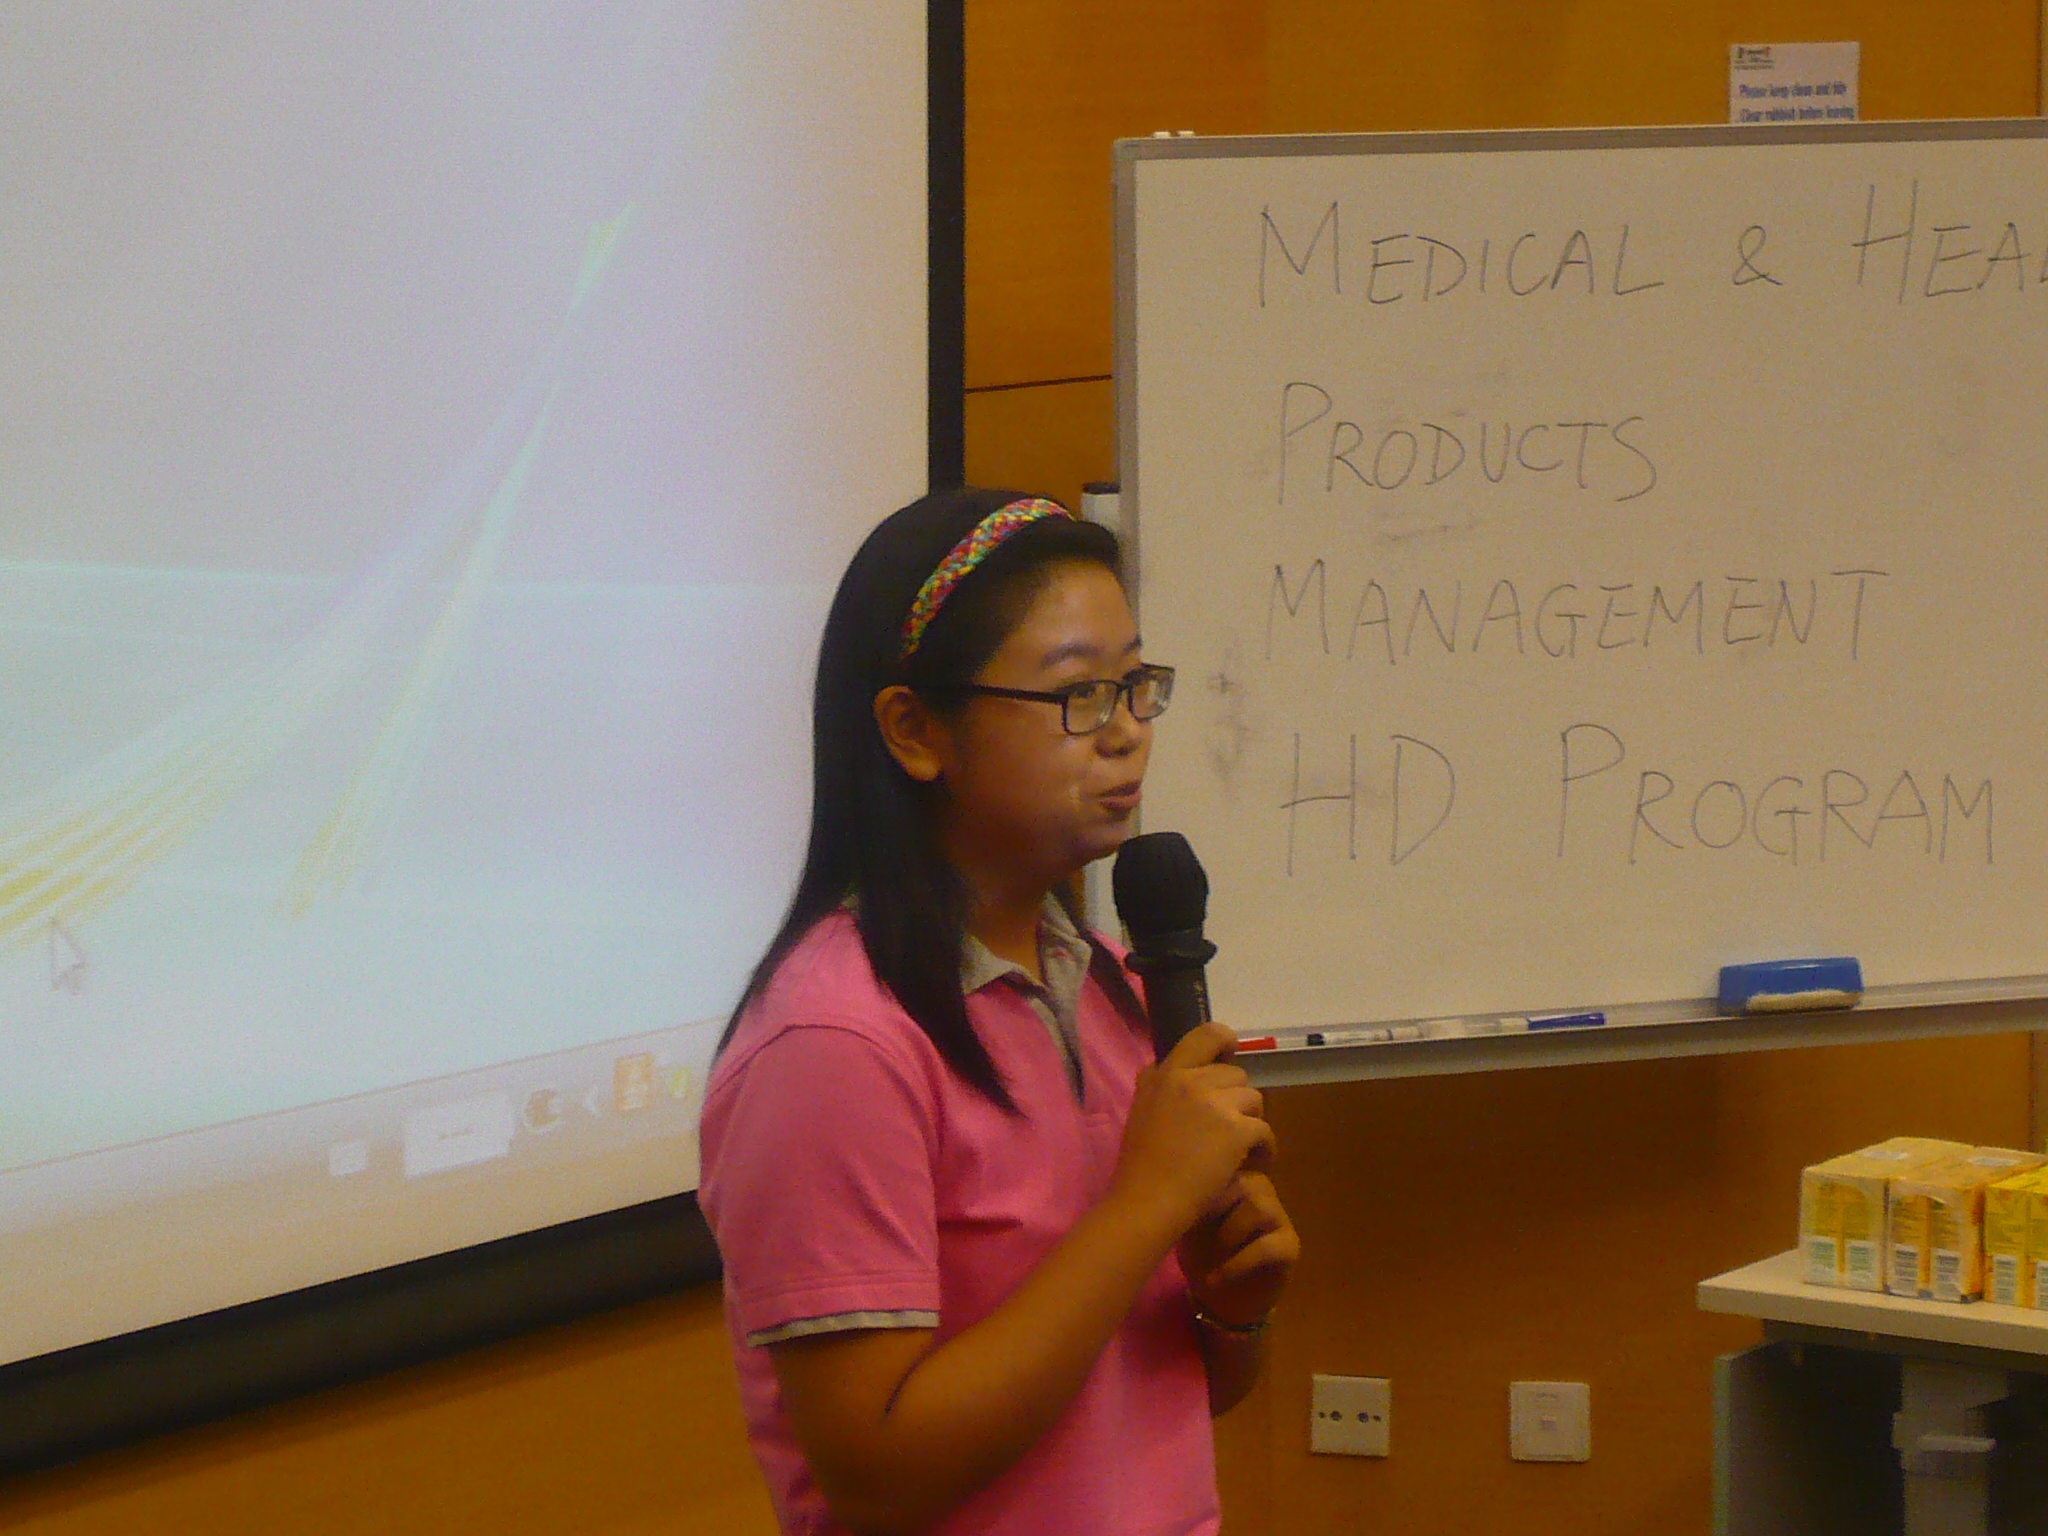 Getting To Know Us (HD in Medical and Health Products Management) - Photo - 25